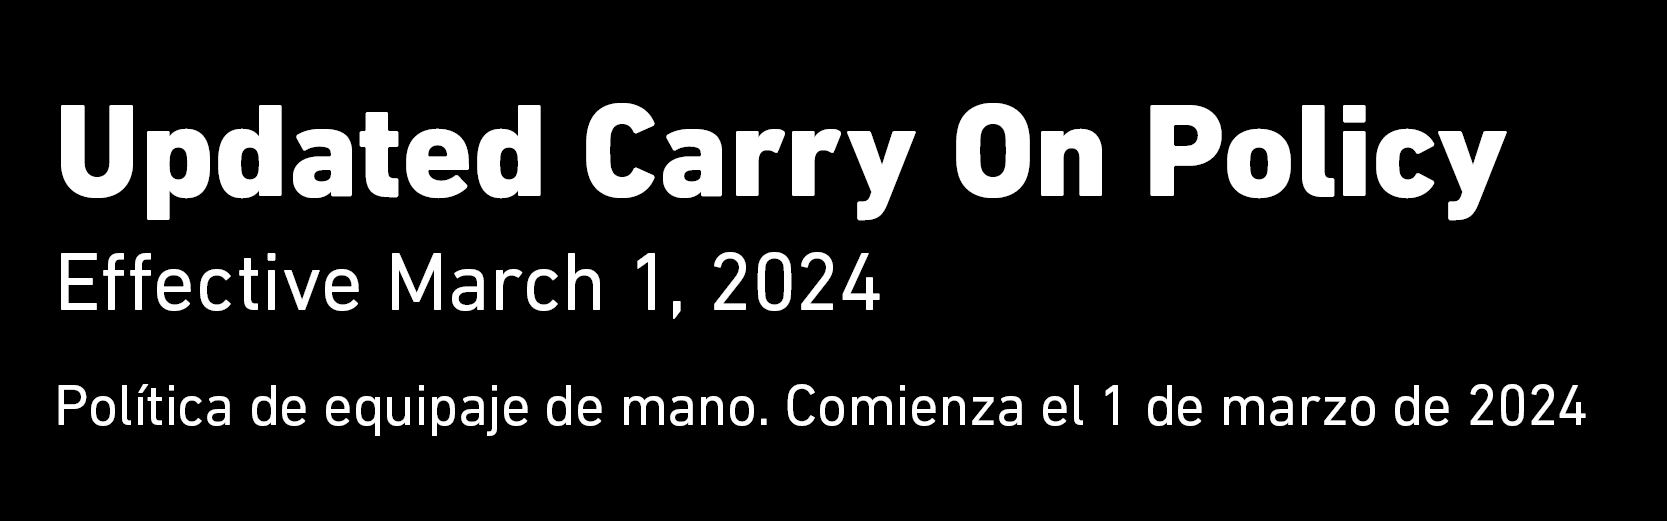 Updated Carry On Policy 